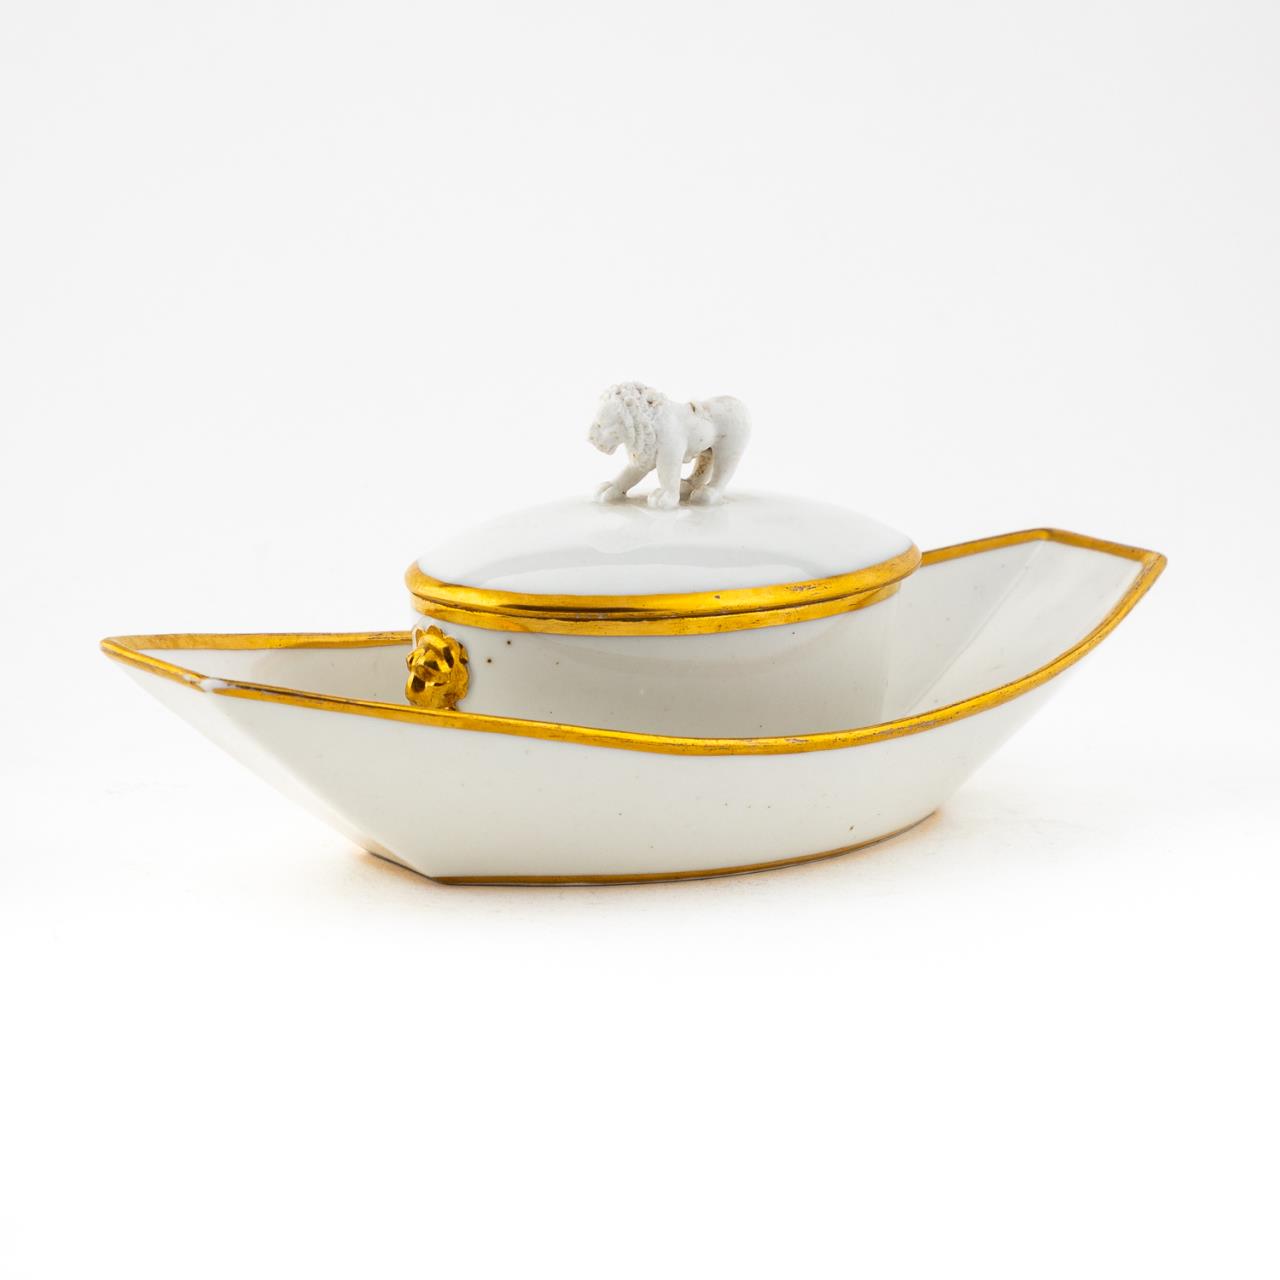 19TH C. FRENCH COVERED SUGAR DISH